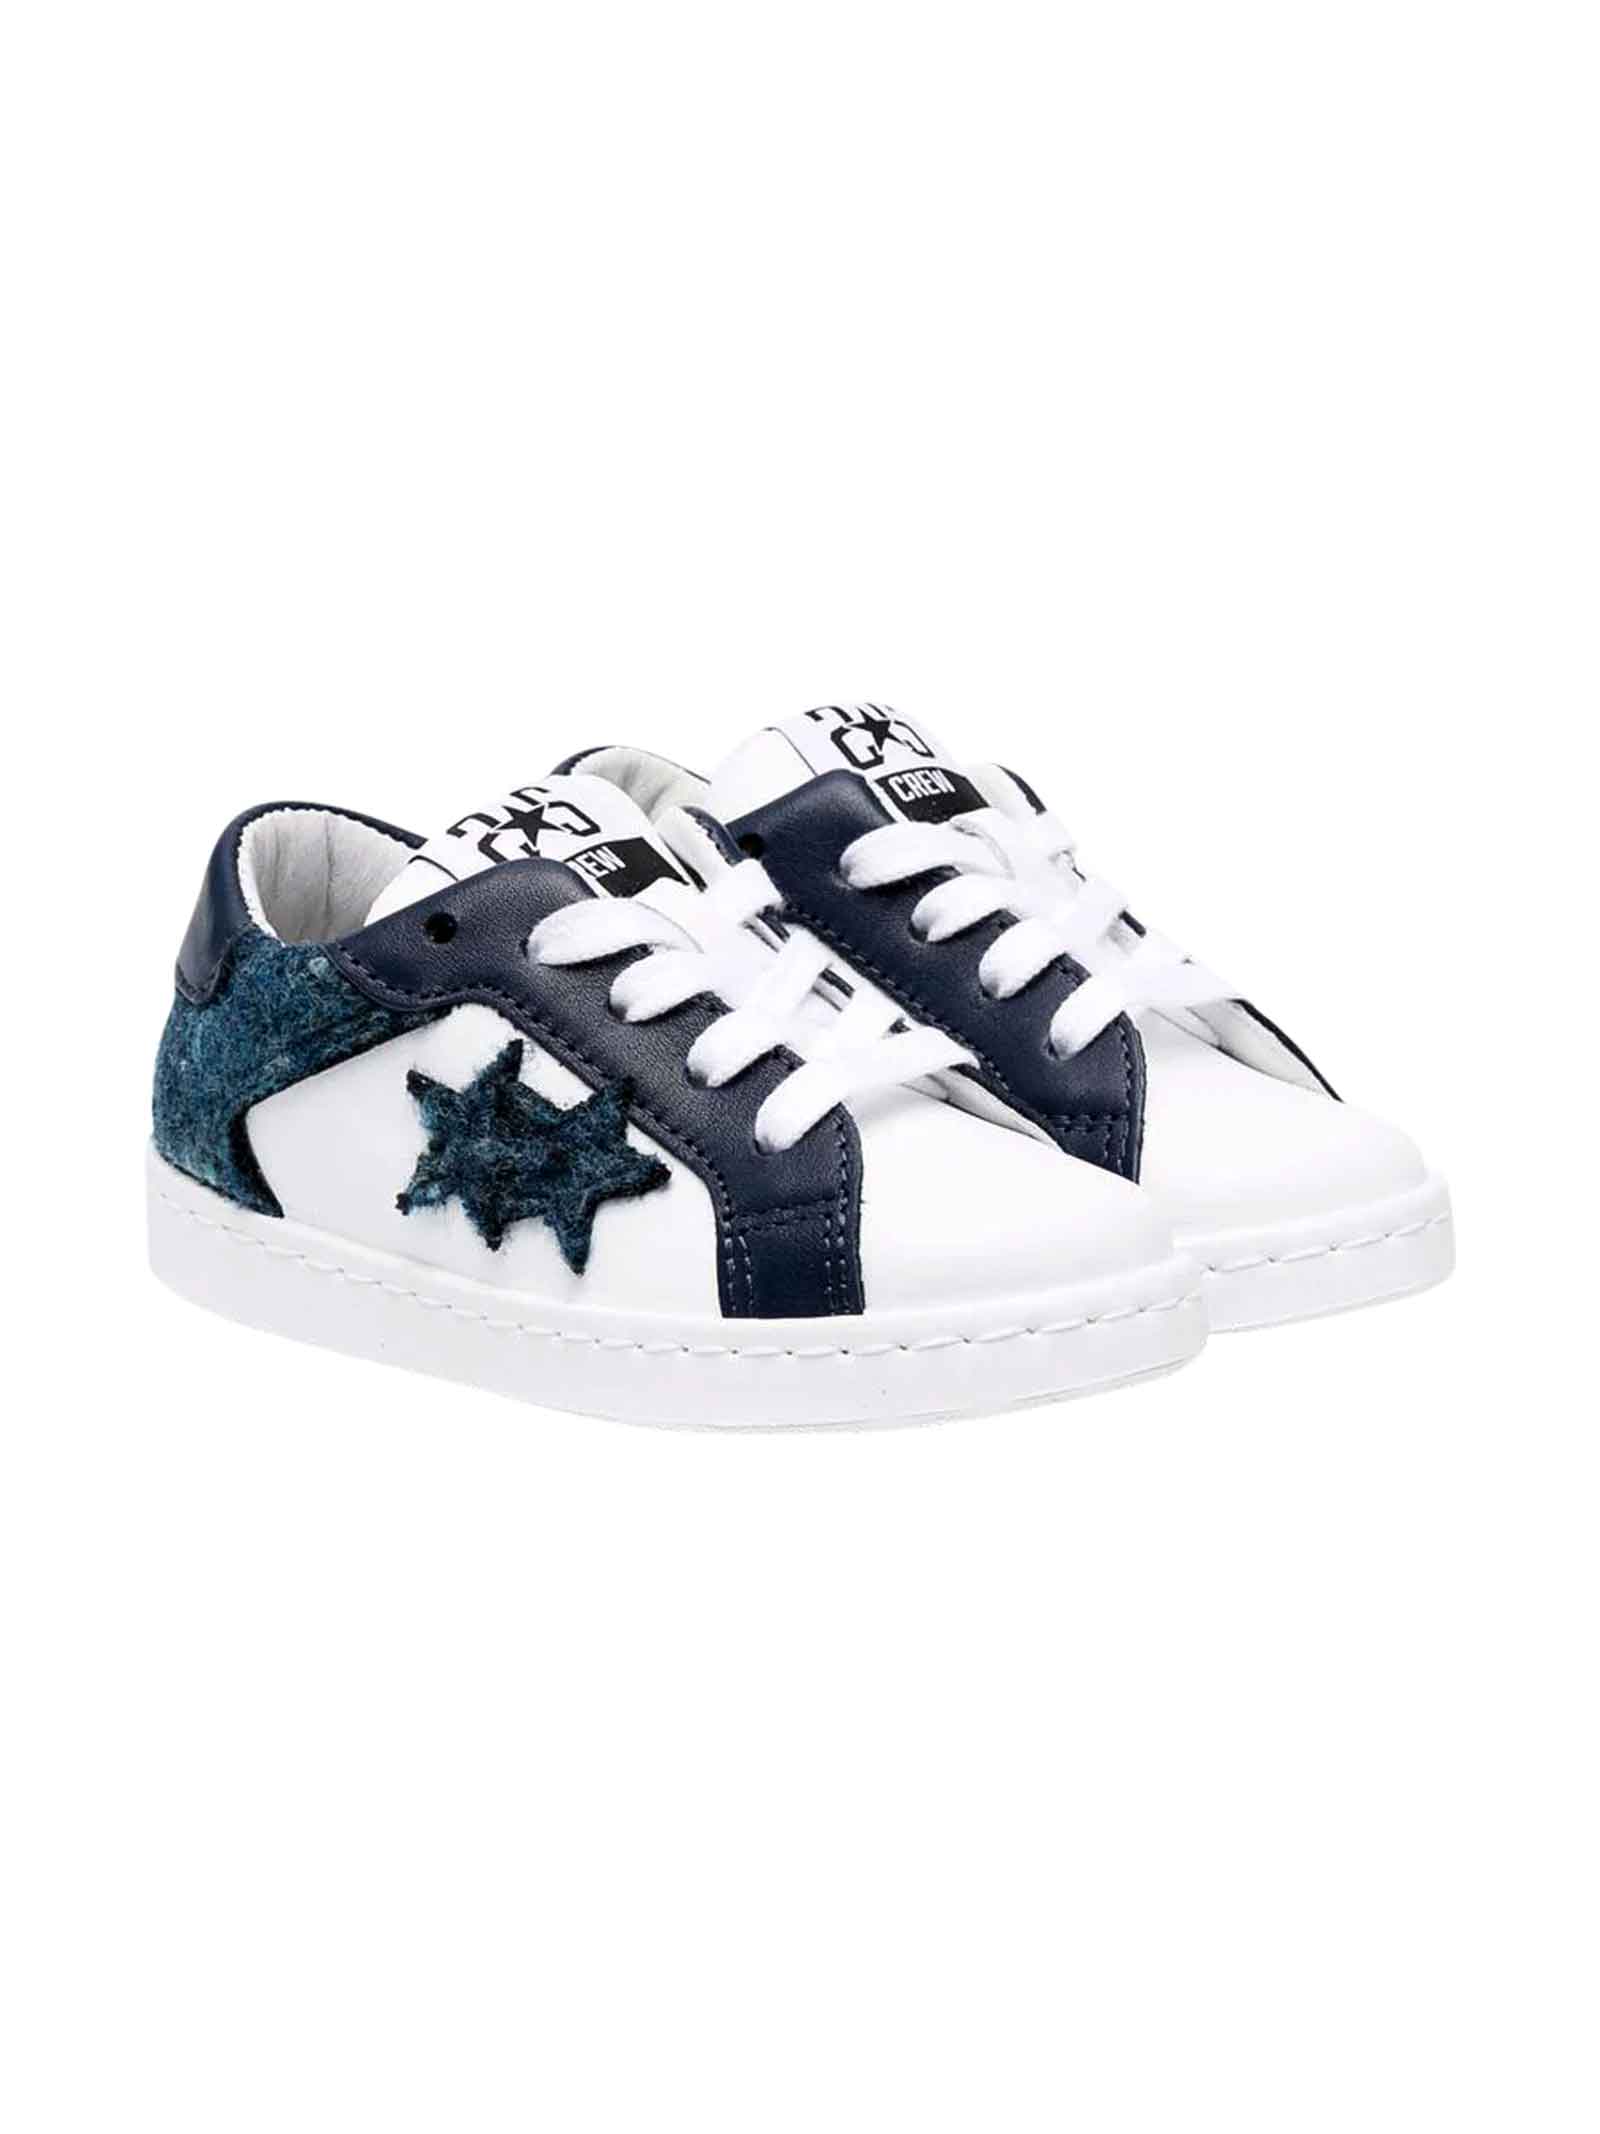 2Star White And Blue Shoes Unisex 2 Star Kids